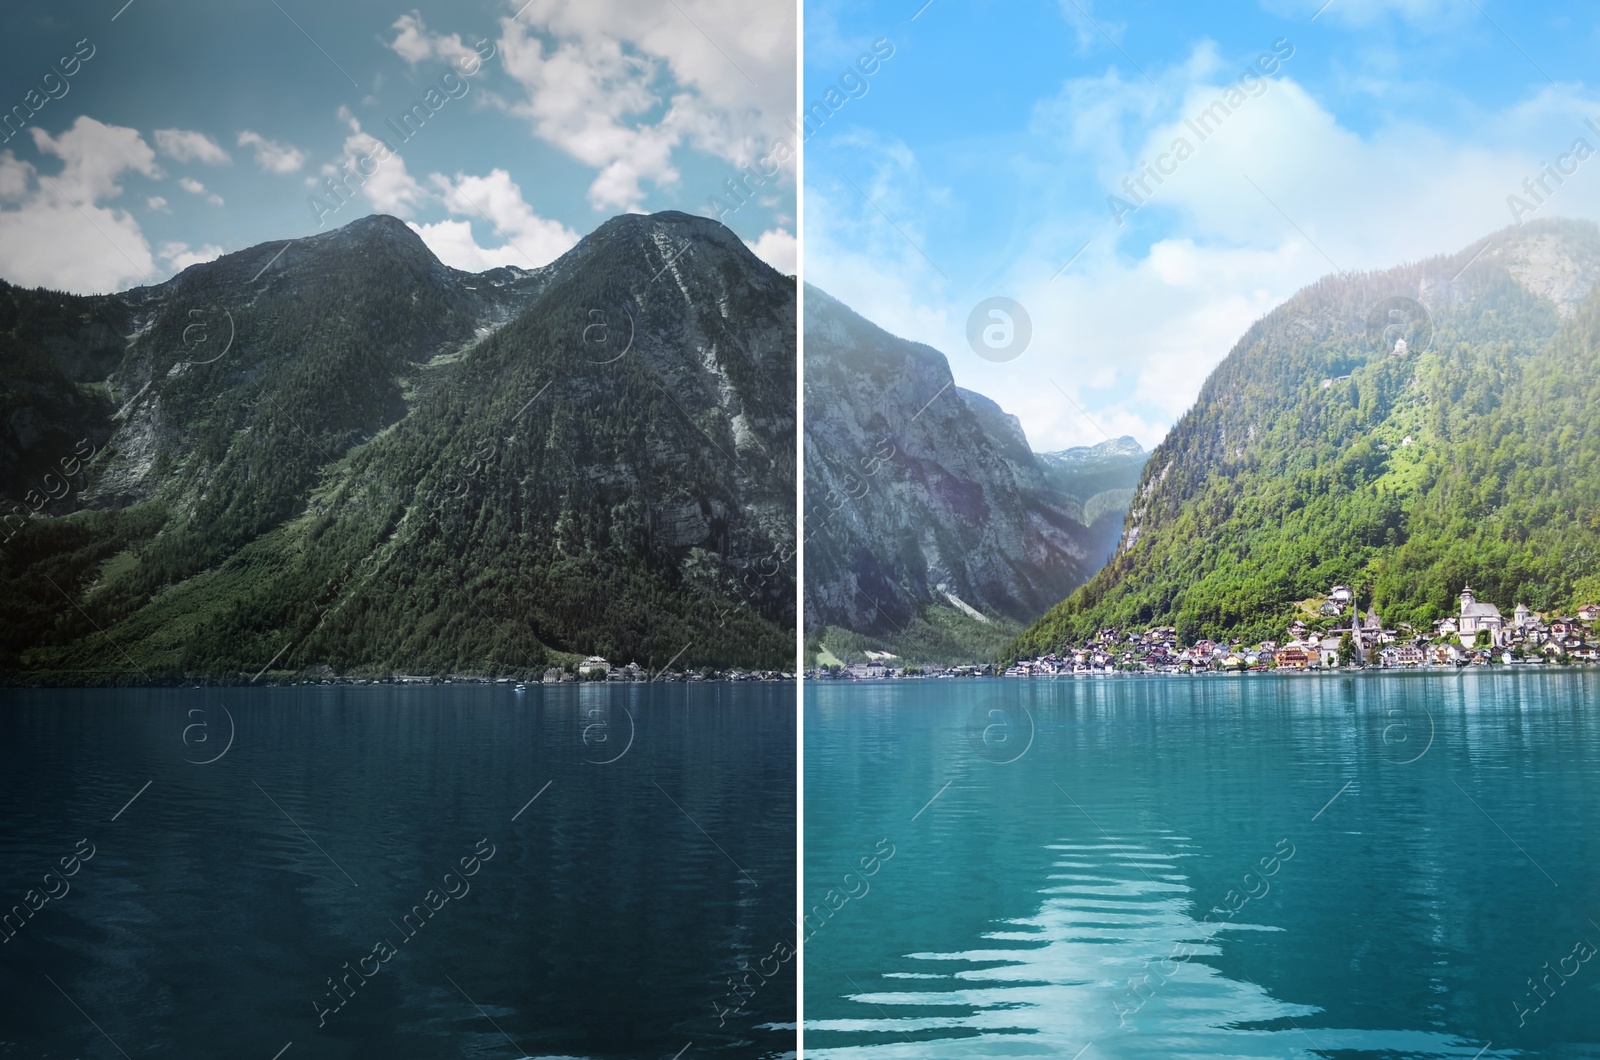 Image of Photo before and after retouch, collage. Picturesque view of small resort town near mountains on riverside